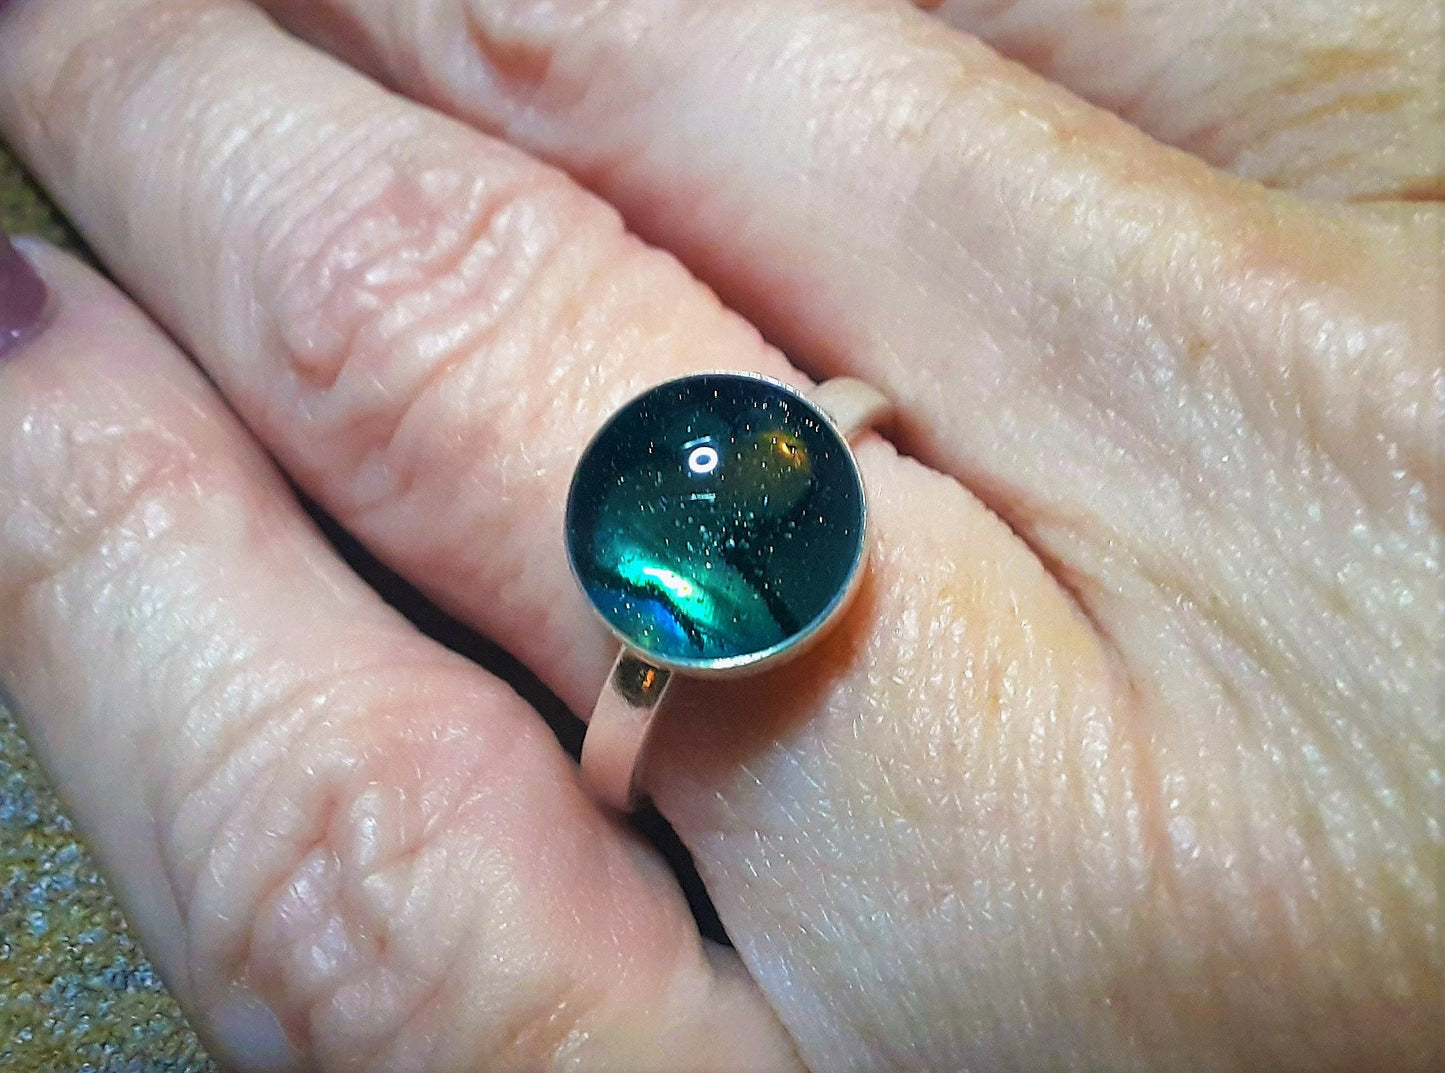 Handmade / Handcrafted 925 Sterling Silver Natural Abalone / Paua Seashell Ring, Sealed with Holographic Mica Infused Resin